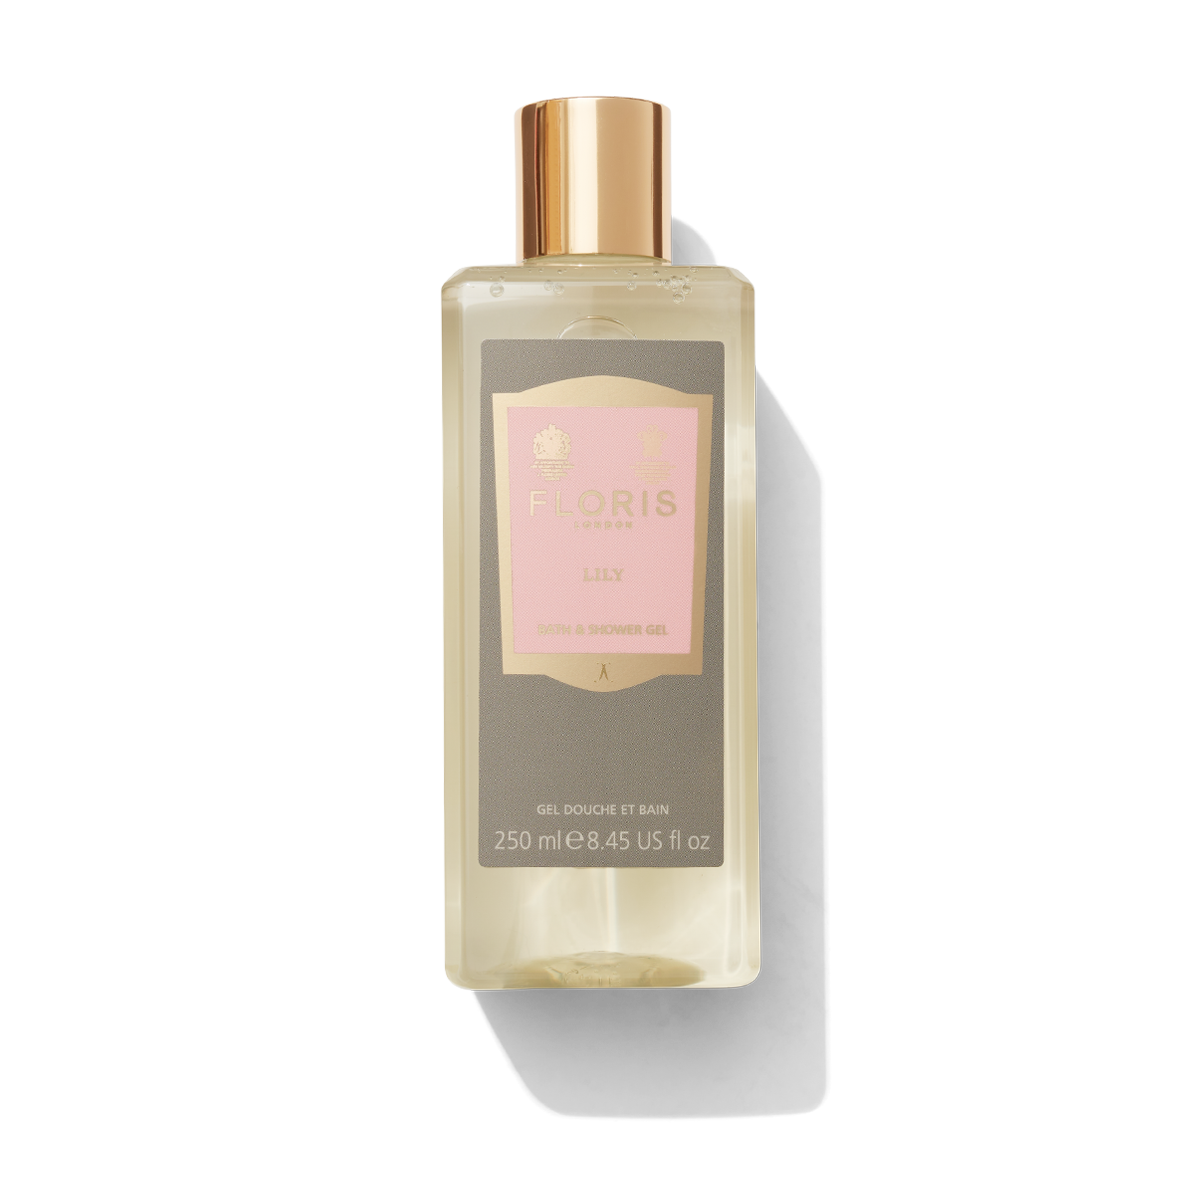 Lily Bath & Shower Gel in clear plastic bottle with light pink and gold label 